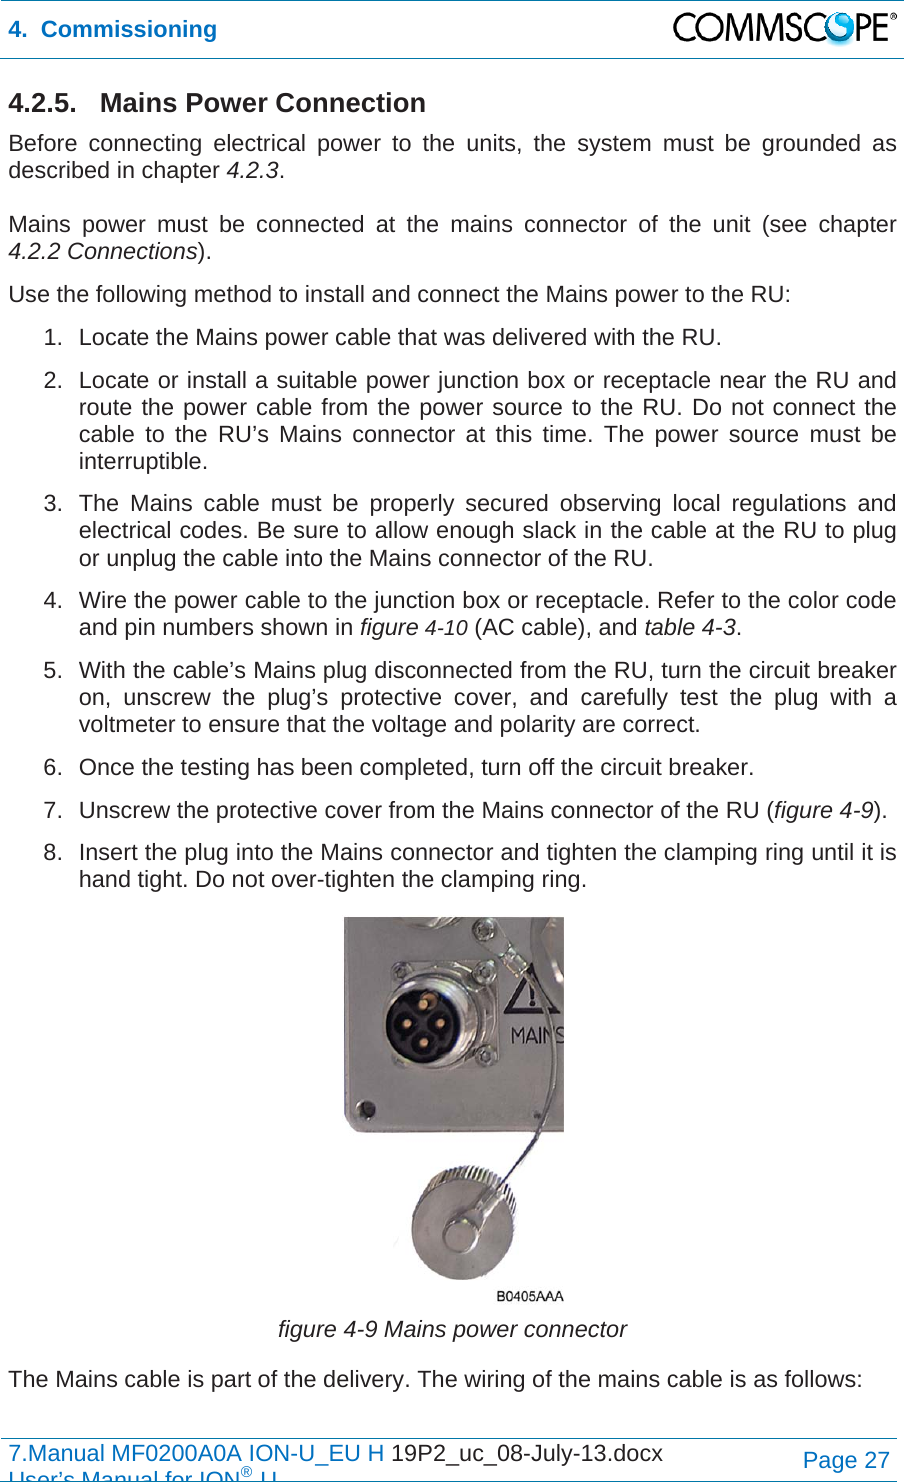 4.  Commissioning  7.Manual MF0200A0A ION-U_EU H 19P2_uc_08-July-13.docx   User’s Manual for ION®UPage 27 4.2.5. Mains Power Connection Before connecting electrical power to the units, the system must be grounded as described in chapter 4.2.3.  Mains power must be connected at the mains connector of the unit (see chapter 4.2.2 Connections). Use the following method to install and connect the Mains power to the RU: 1.  Locate the Mains power cable that was delivered with the RU. 2.  Locate or install a suitable power junction box or receptacle near the RU and route the power cable from the power source to the RU. Do not connect the cable to the RU’s Mains connector at this time. The power source must be interruptible. 3.  The Mains cable must be properly secured observing local regulations and electrical codes. Be sure to allow enough slack in the cable at the RU to plug or unplug the cable into the Mains connector of the RU. 4.  Wire the power cable to the junction box or receptacle. Refer to the color code and pin numbers shown in figure 4-10 (AC cable), and table 4-3. 5.  With the cable’s Mains plug disconnected from the RU, turn the circuit breaker on, unscrew the plug’s protective cover, and carefully test the plug with a voltmeter to ensure that the voltage and polarity are correct. 6.  Once the testing has been completed, turn off the circuit breaker. 7.  Unscrew the protective cover from the Mains connector of the RU (figure 4-9). 8.  Insert the plug into the Mains connector and tighten the clamping ring until it is hand tight. Do not over-tighten the clamping ring.  figure 4-9 Mains power connector The Mains cable is part of the delivery. The wiring of the mains cable is as follows:  